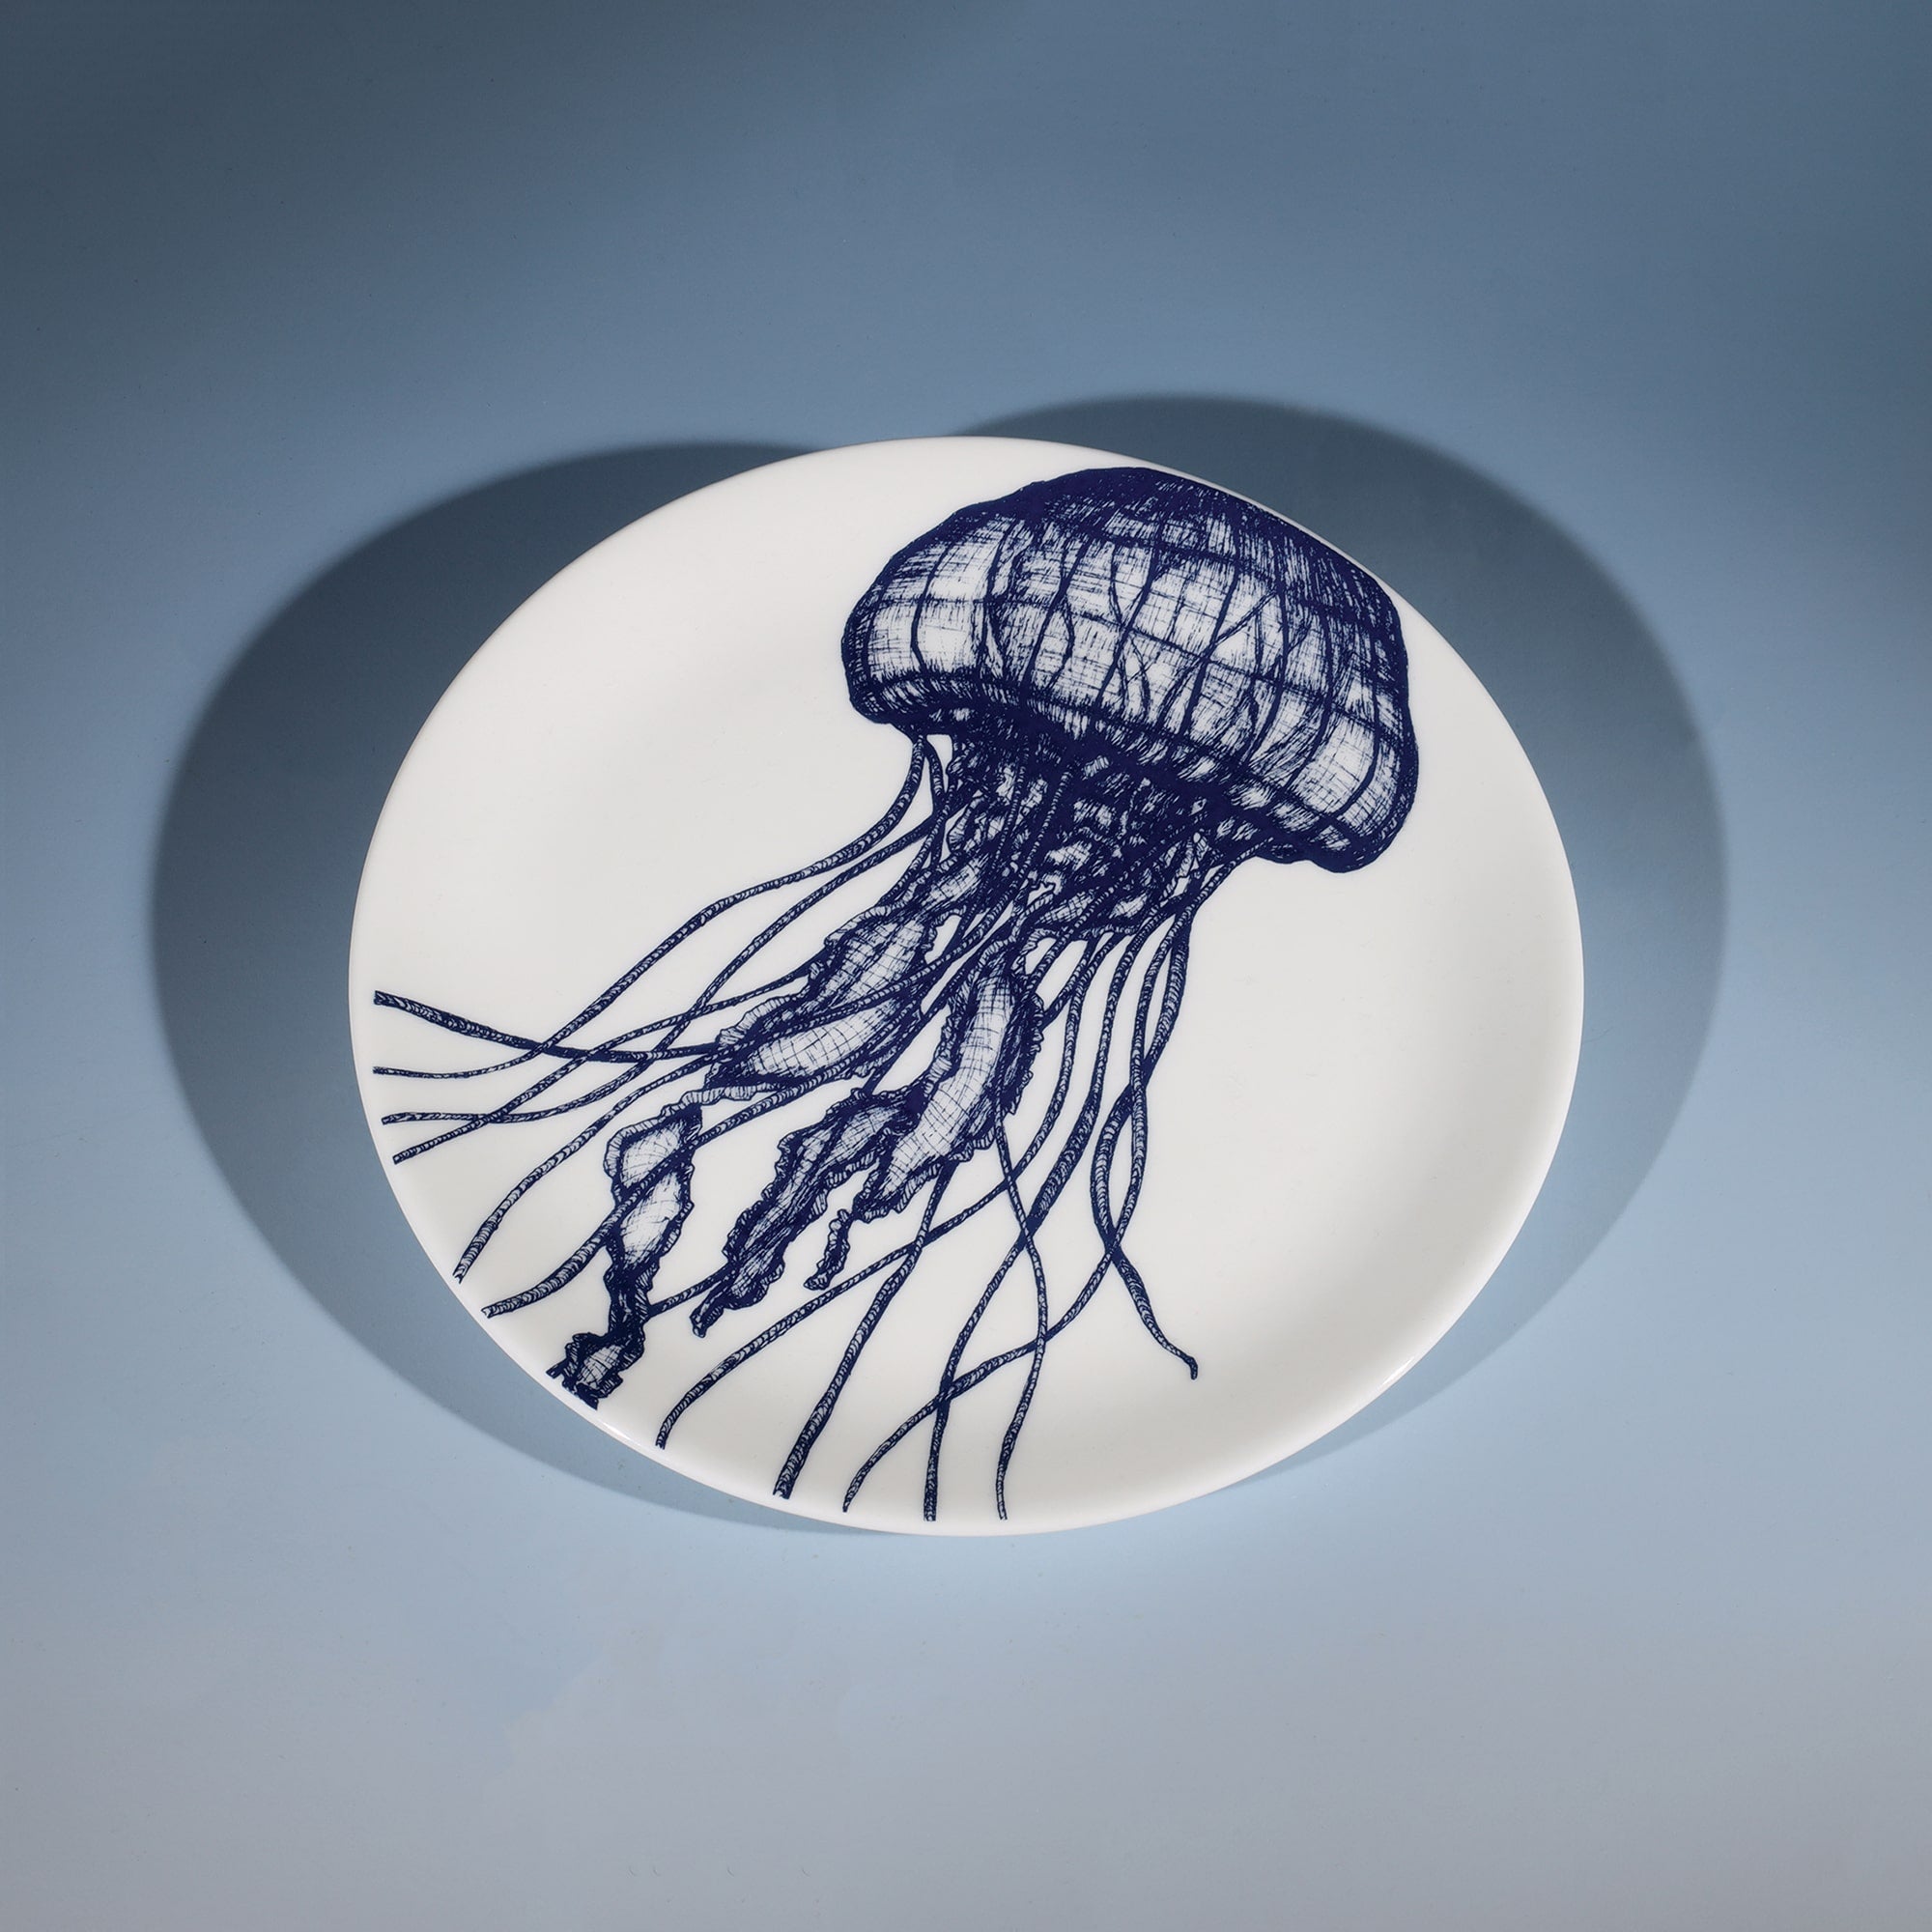 Bone China White plate with hand drawn illustrations of our Jellyfish design on a side plate in Navy